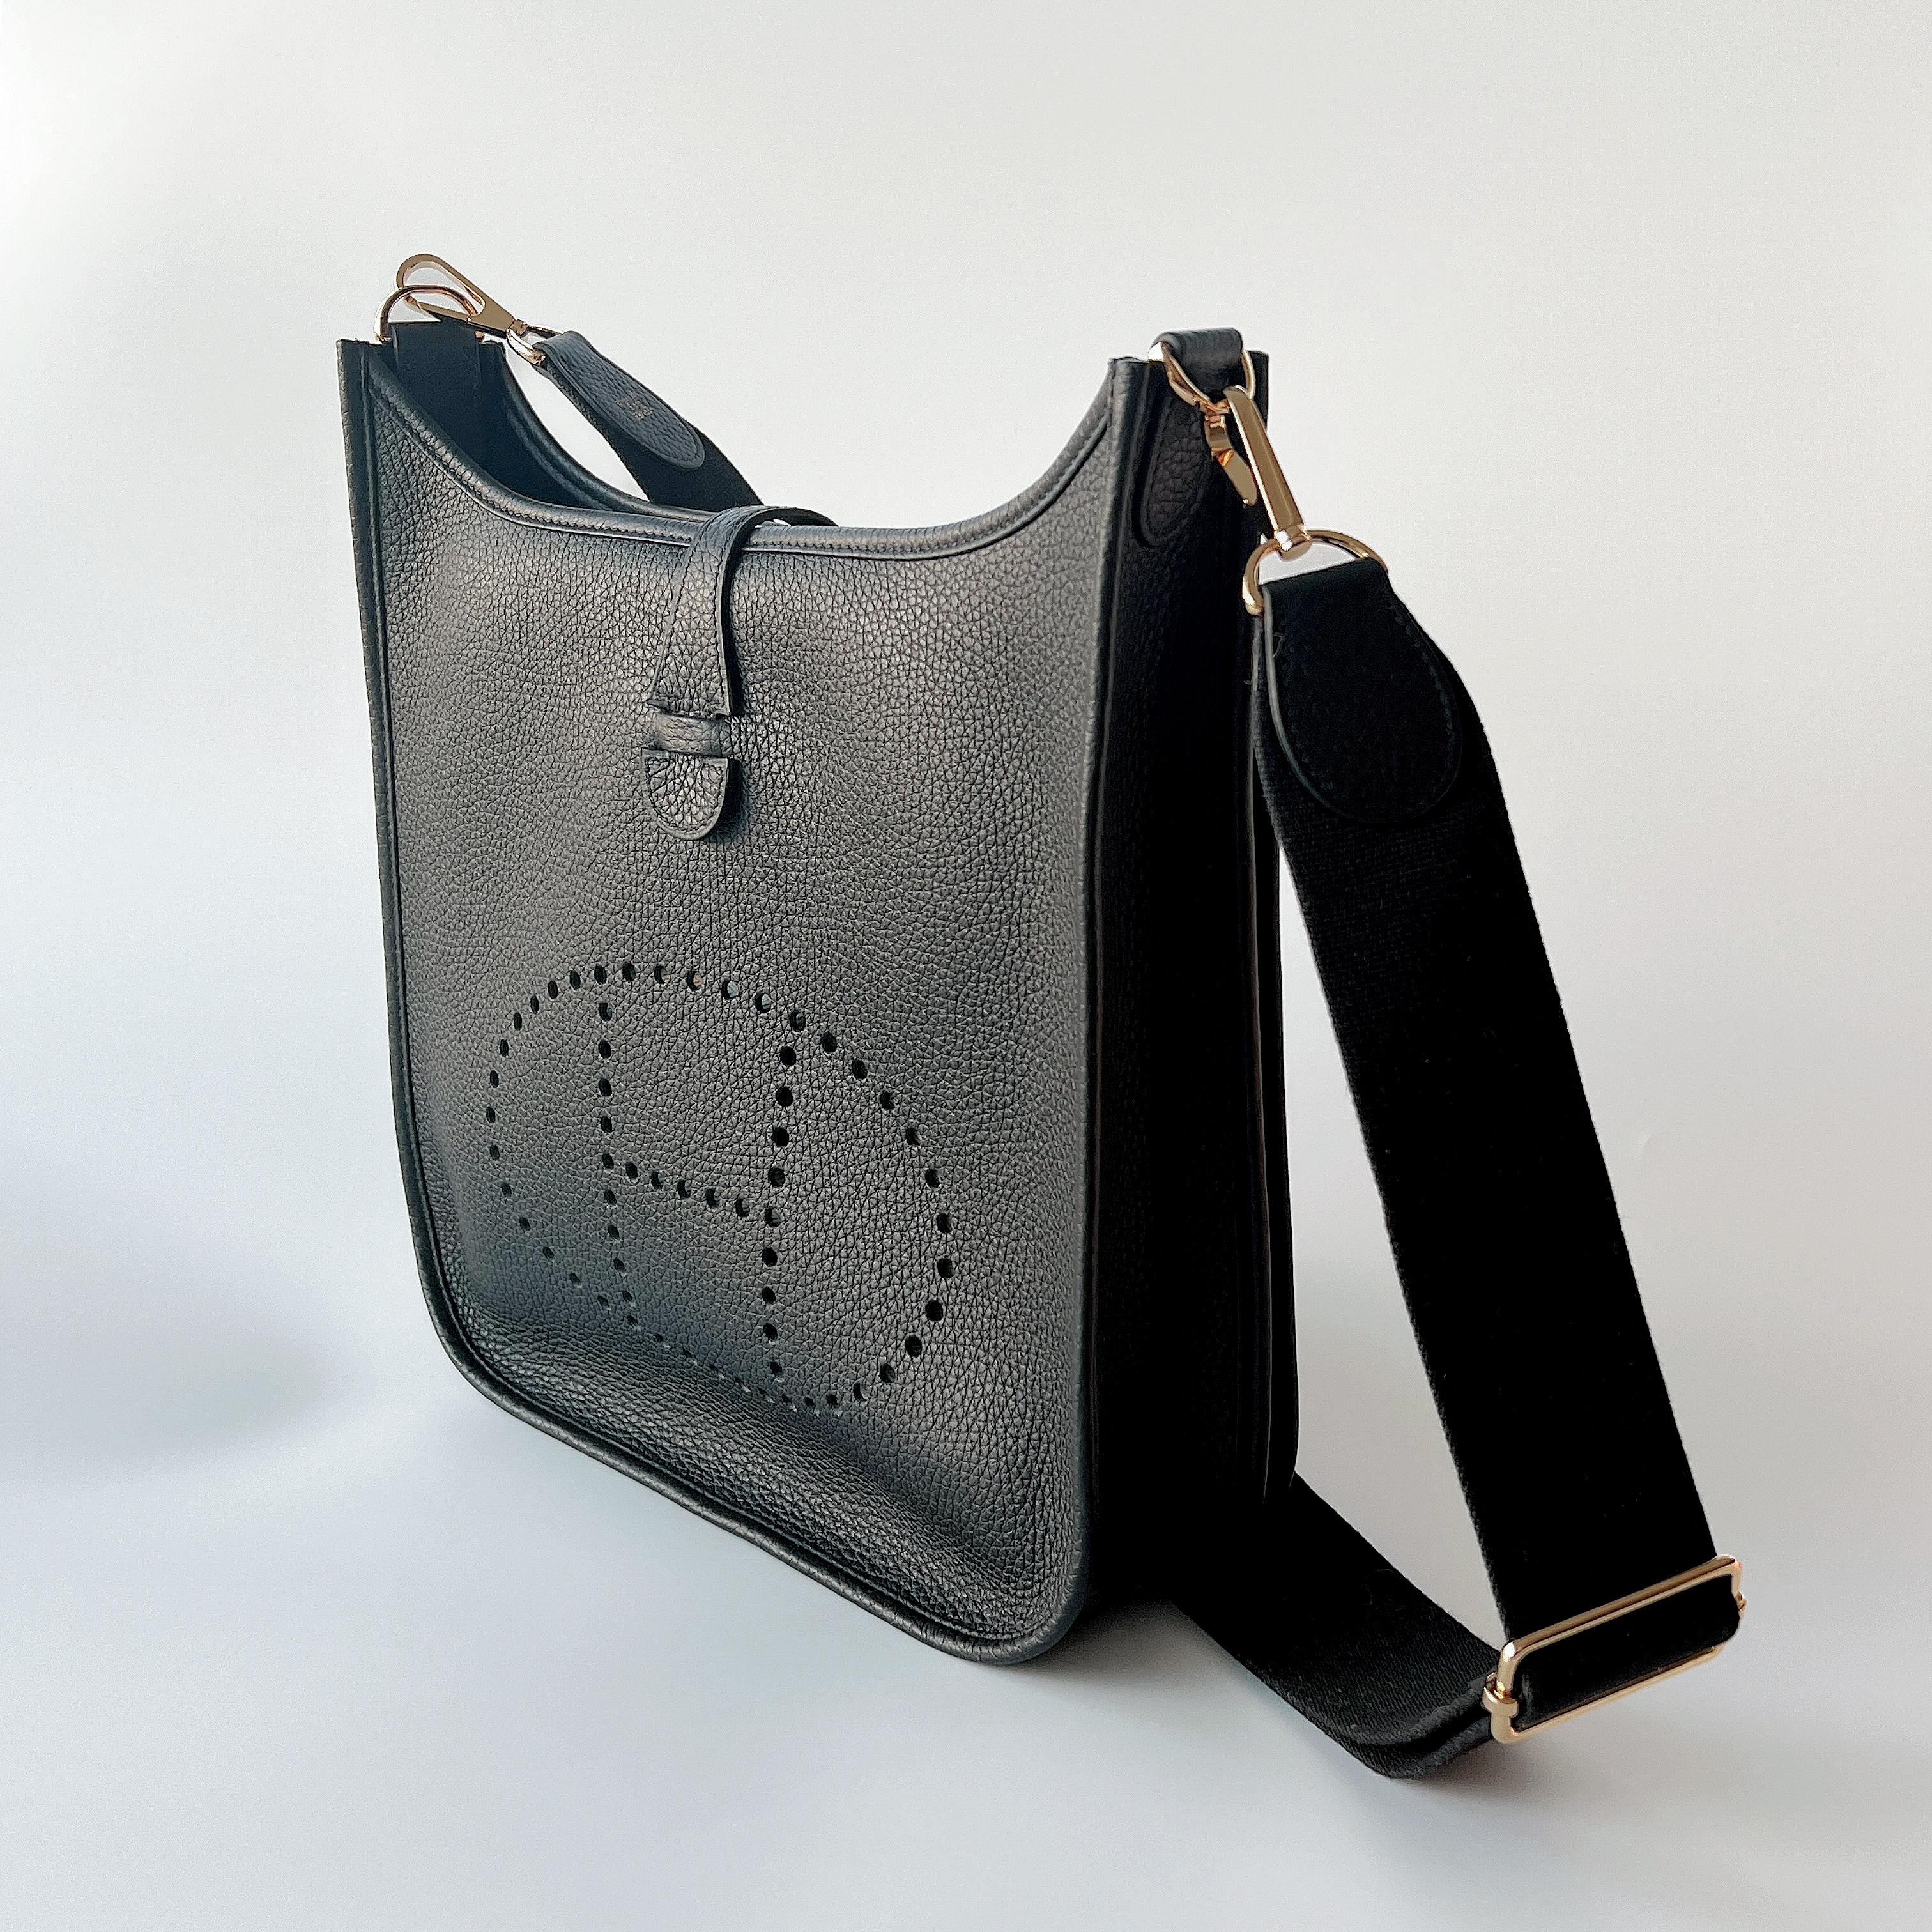 Hermes Evelyne III 29 Bag In Black with classic Gold Hardware. The Evelyne comes in clemence leather with an adjustable strap. The detailing is a perforated 